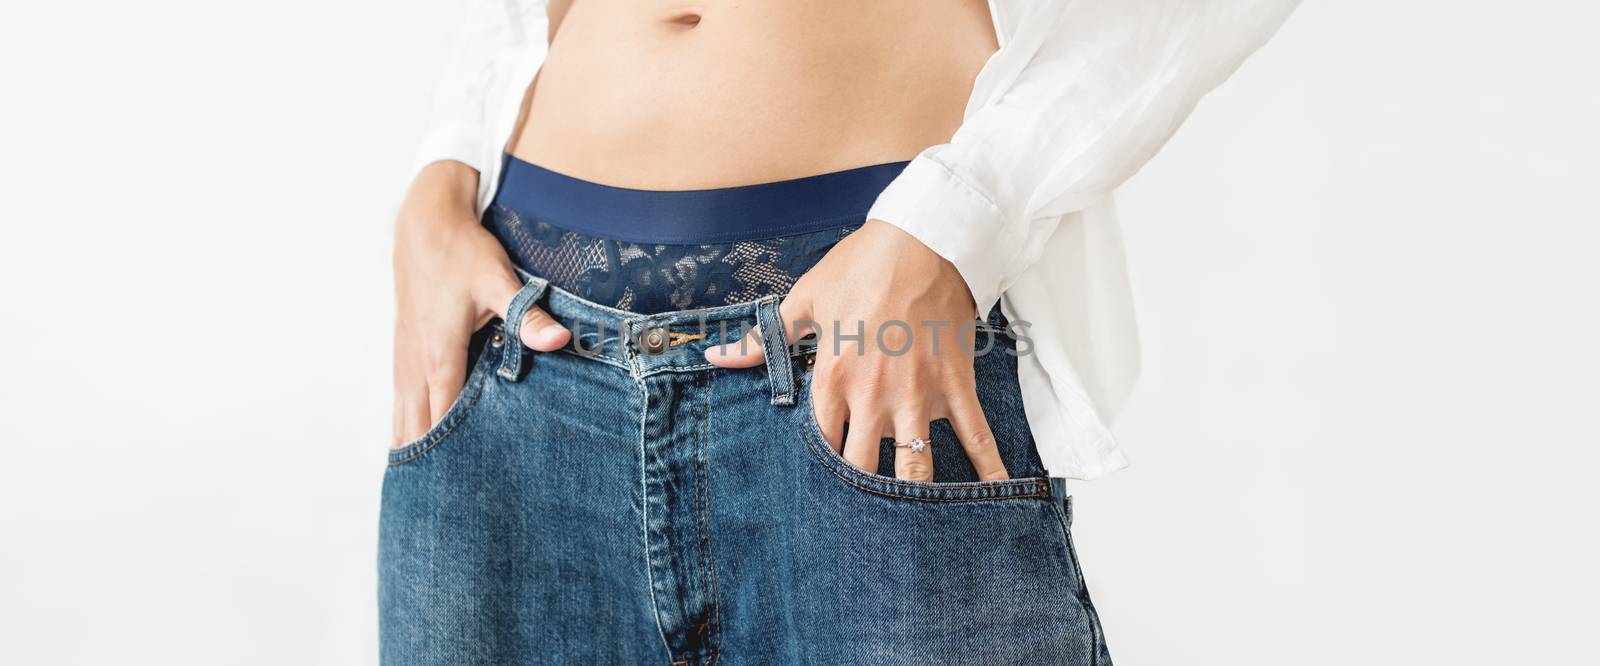 Woman hides her palm with engagement ring in pocket of classic b by aksenovko